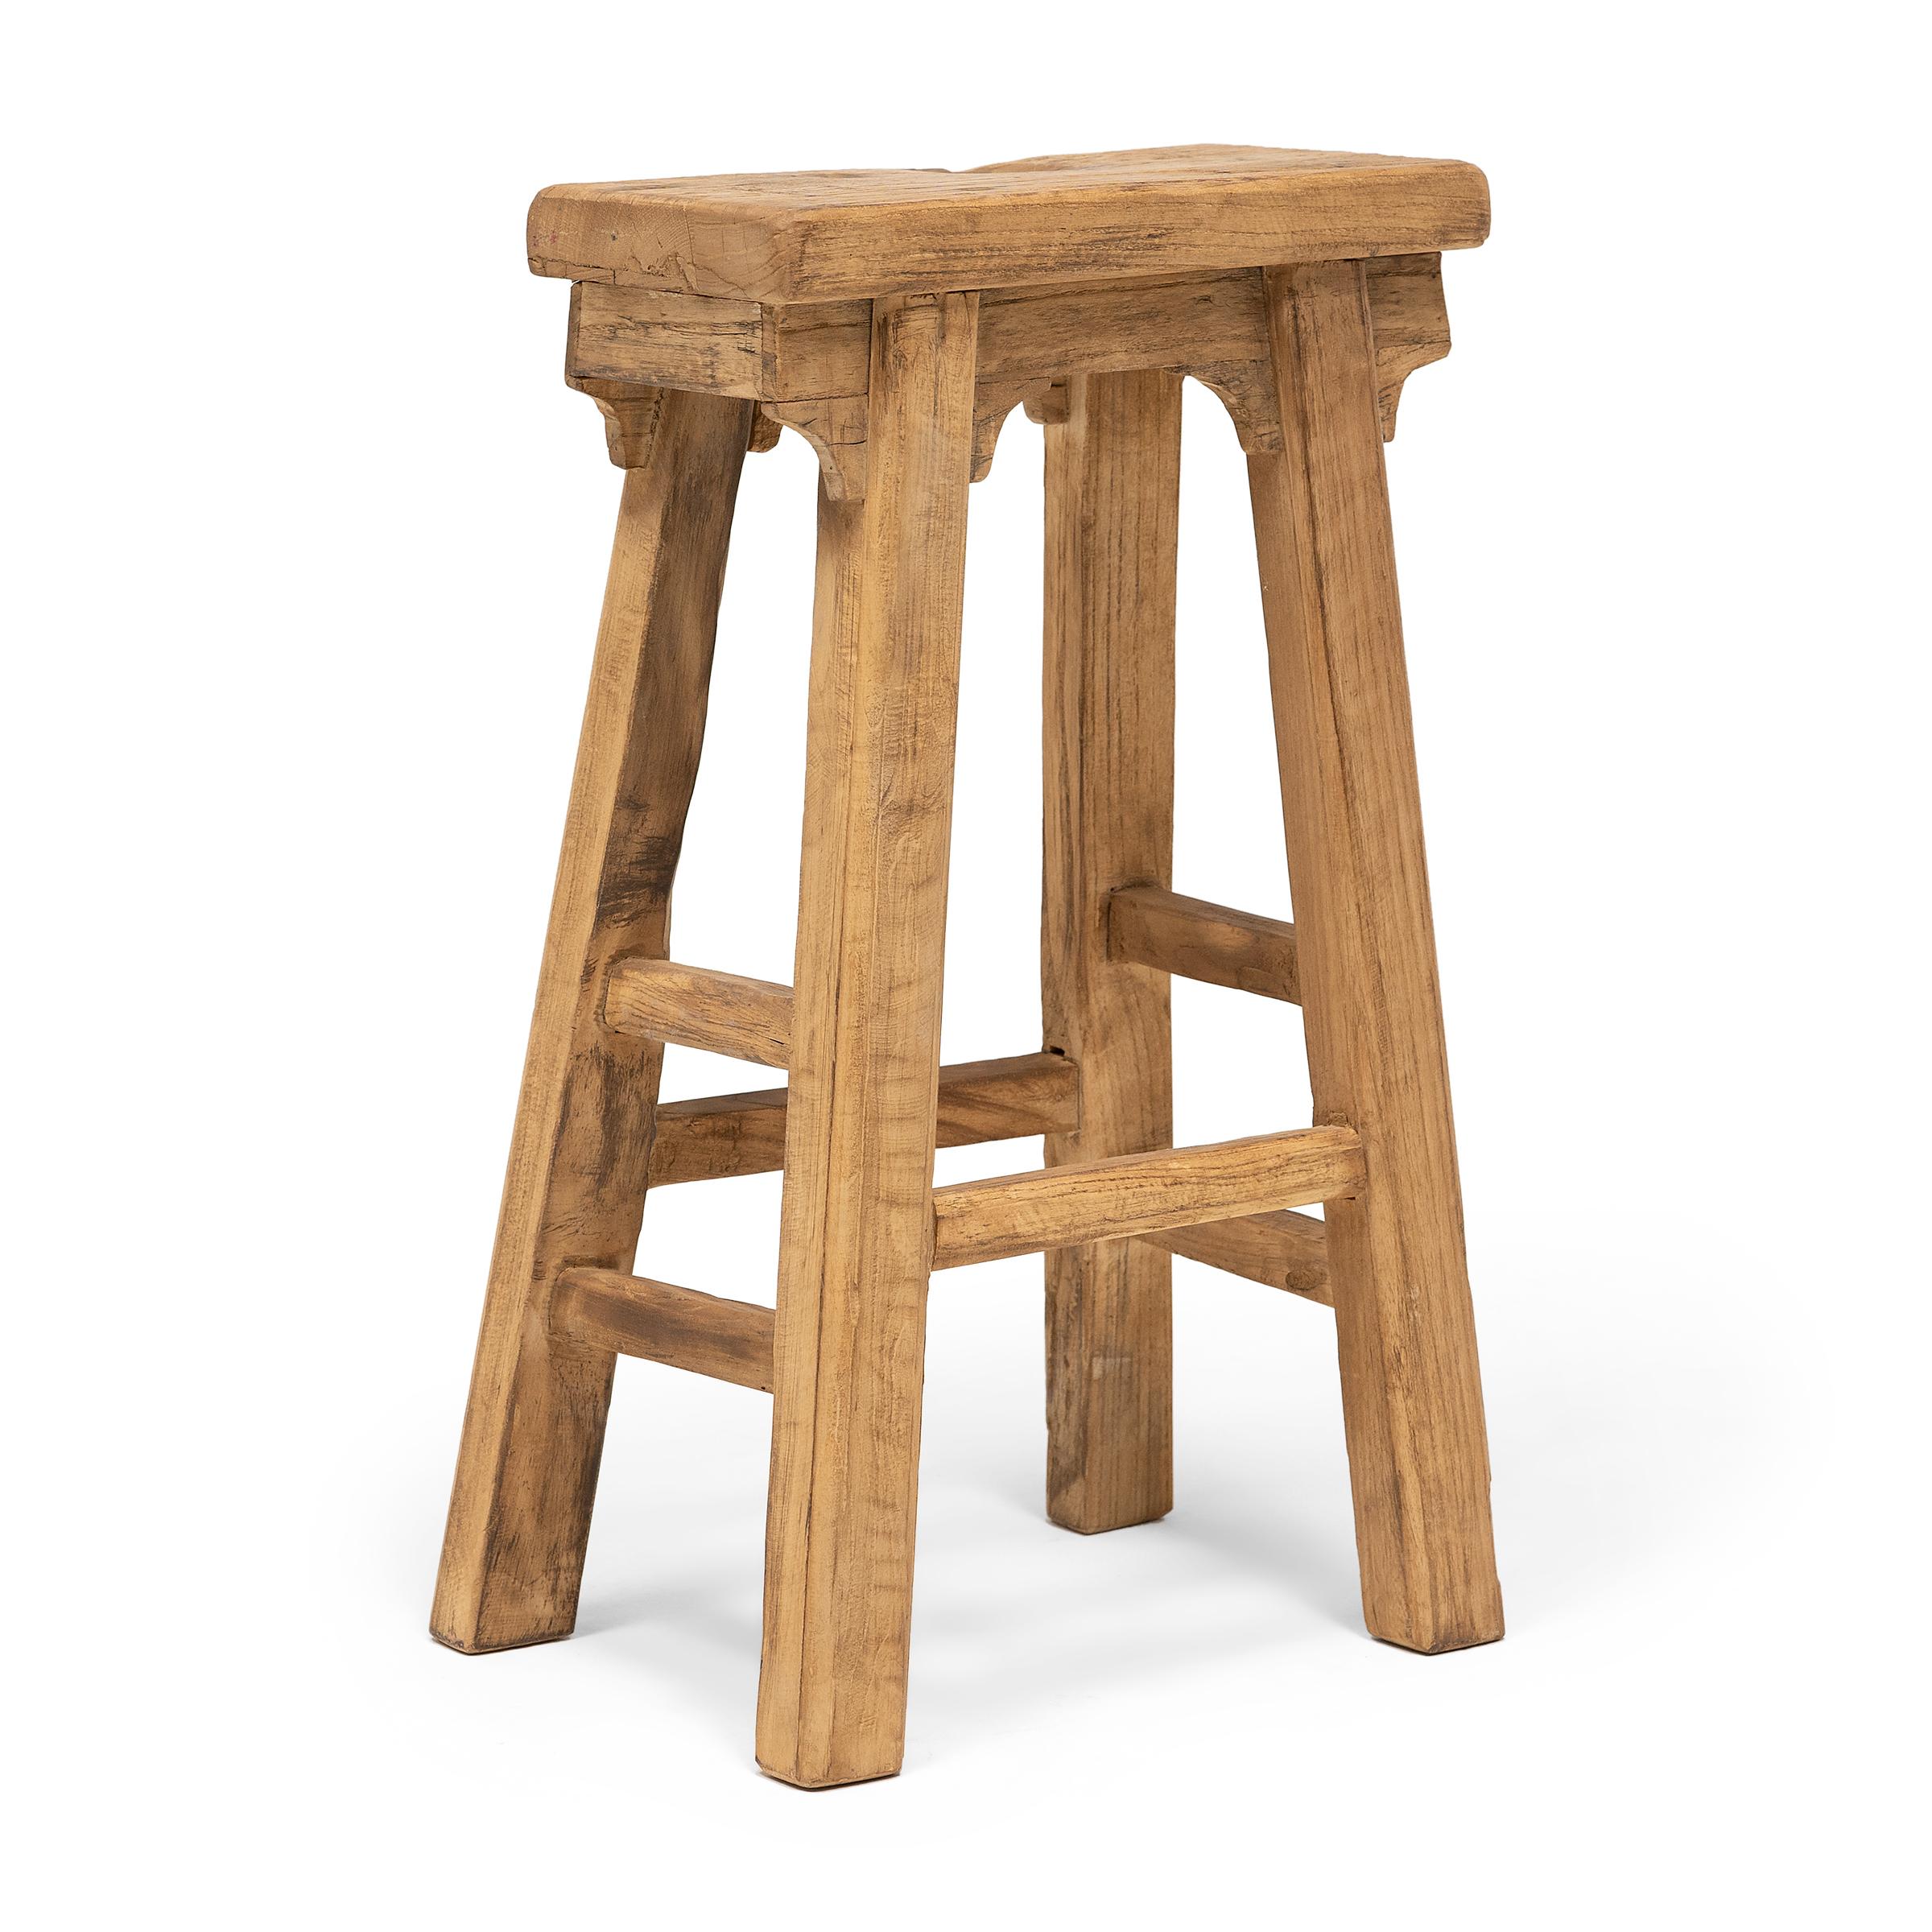 This provincial stool is artisan-crafted in the style of traditional Chinese courtyard stools typically used throughout a Qing dynasty home as versatile everyday seating. Made of reclaimed elmwood, the tapered stool features a narrow, rectangular